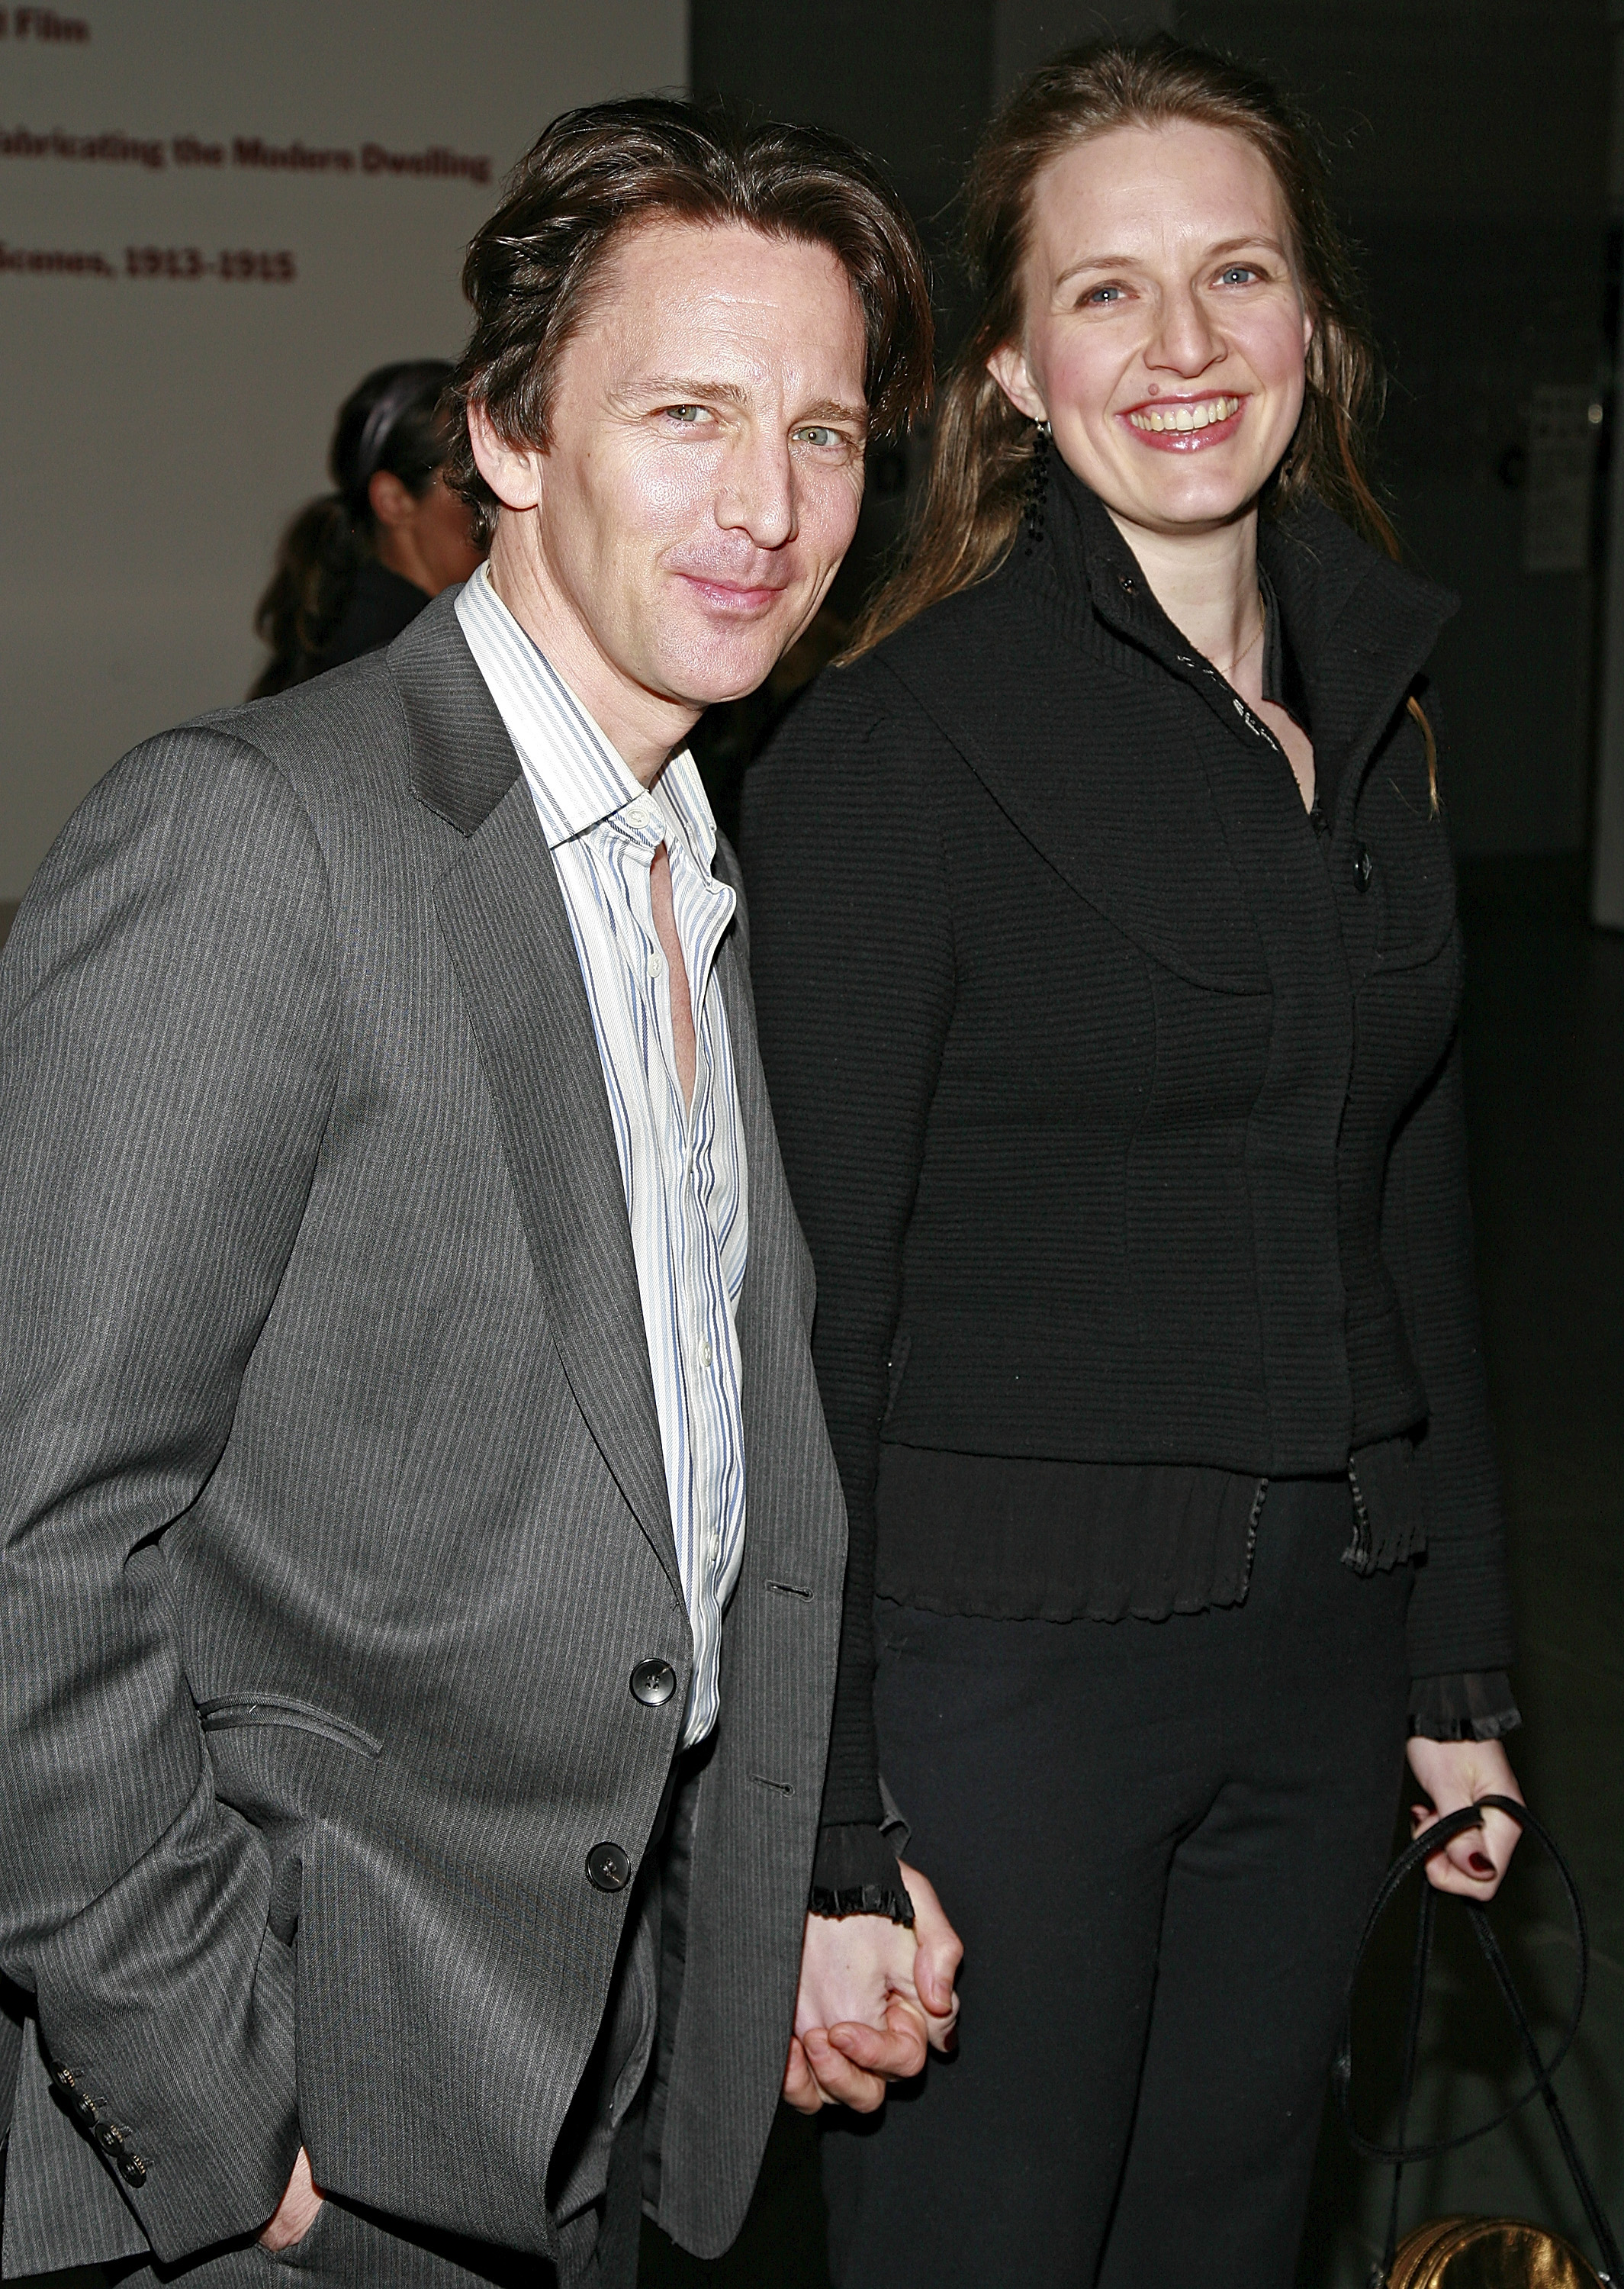 Andrew McCarthy and Dolores Rice attend Sony Pictures Classics Premiere Of "Standard Operating Procedure" at The Museum of Modern Art on April 7, 2008 in New York City. | Source: Getty Images